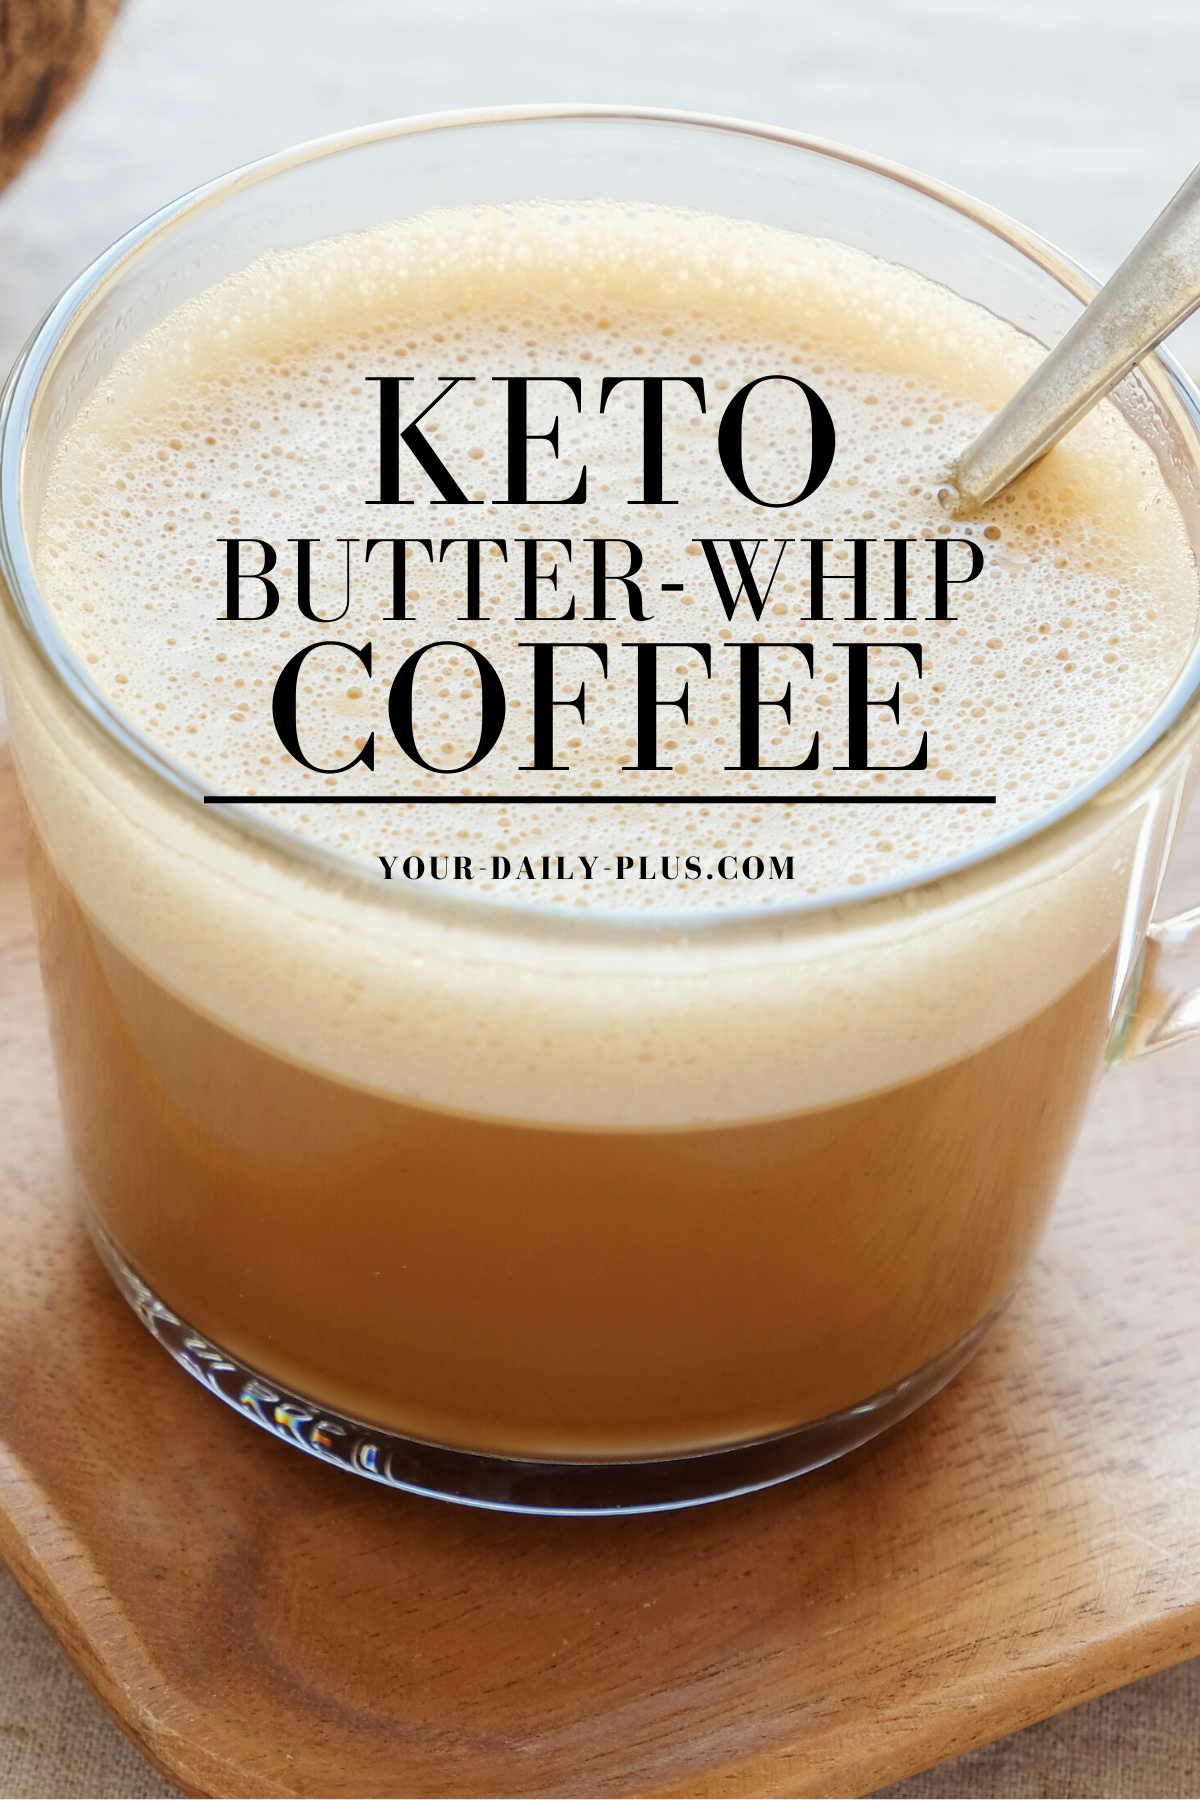 You are not going to believe you’ve been missing out on the awesome flavor of butter and coffee all this time. The texture of the coffee is creamy and the power kick you’re going to get out of this is out of this world. In fact, feel totally satiated with just the butter coffee for the whole of the morning, but you ave the option of pairing it with nuts. #coffee #ketocoffee #ketodiet